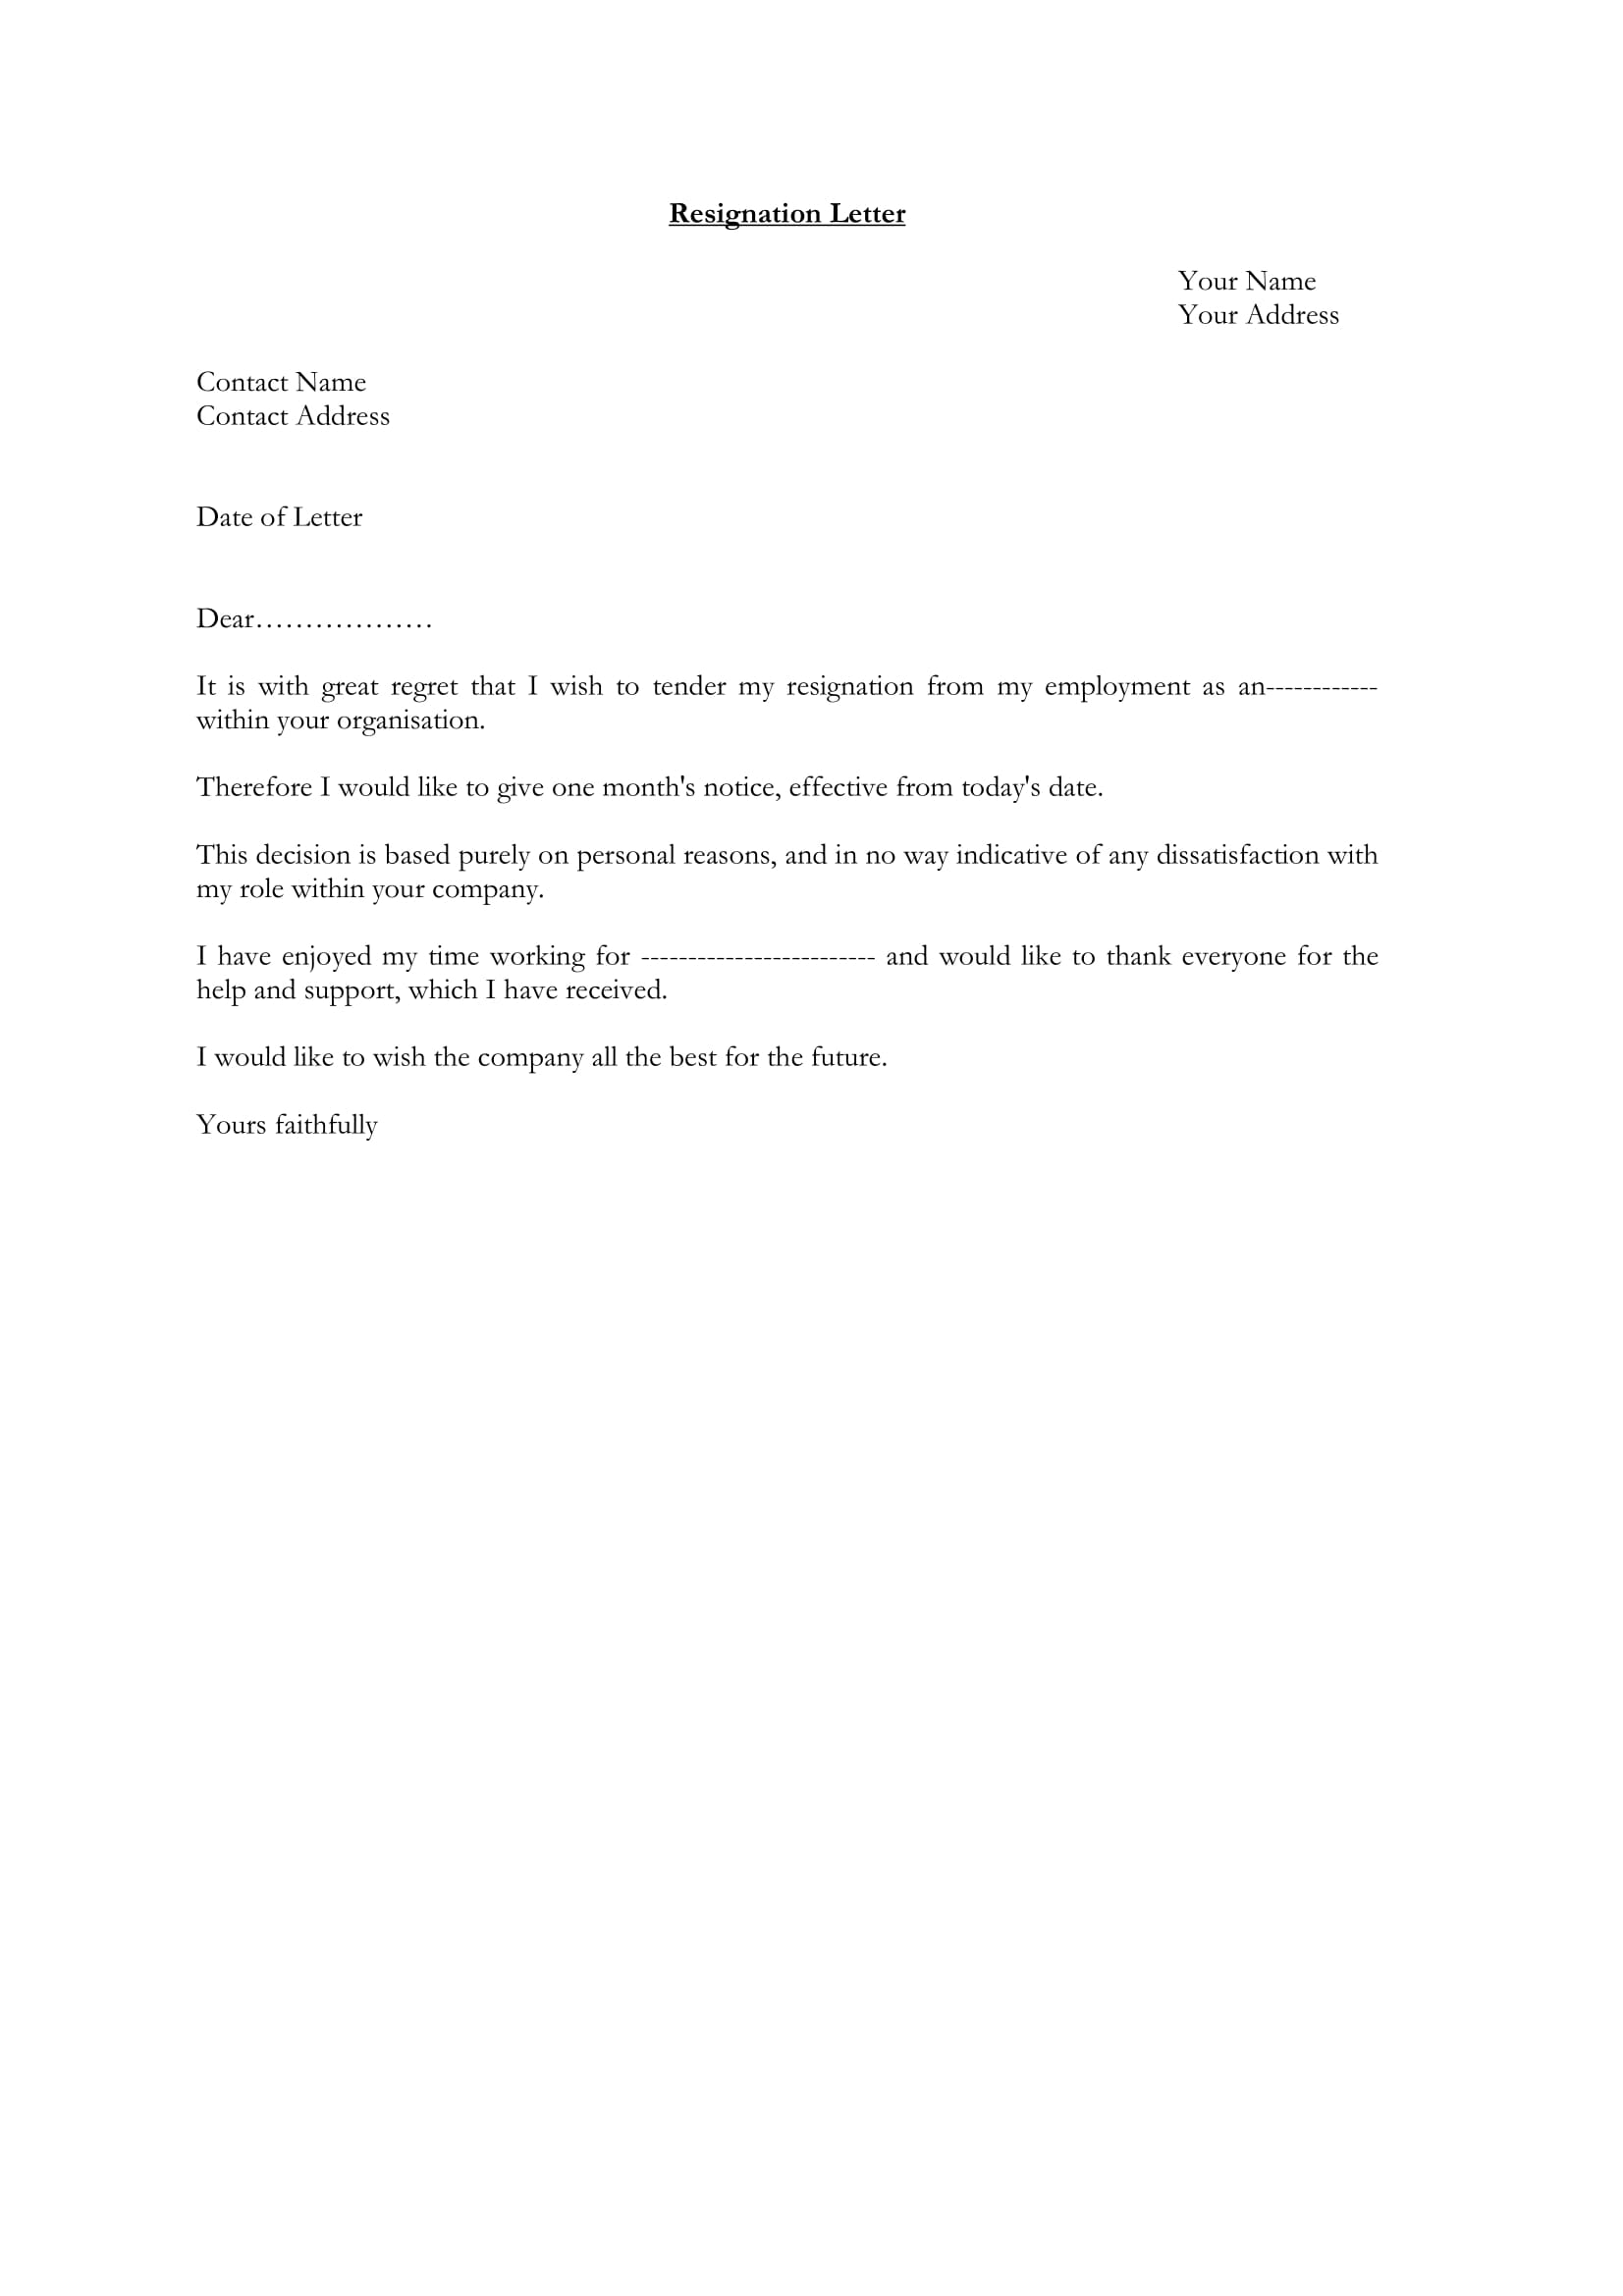 9+ Manager Resignation Letter Examples - PDF, DOC | Examples